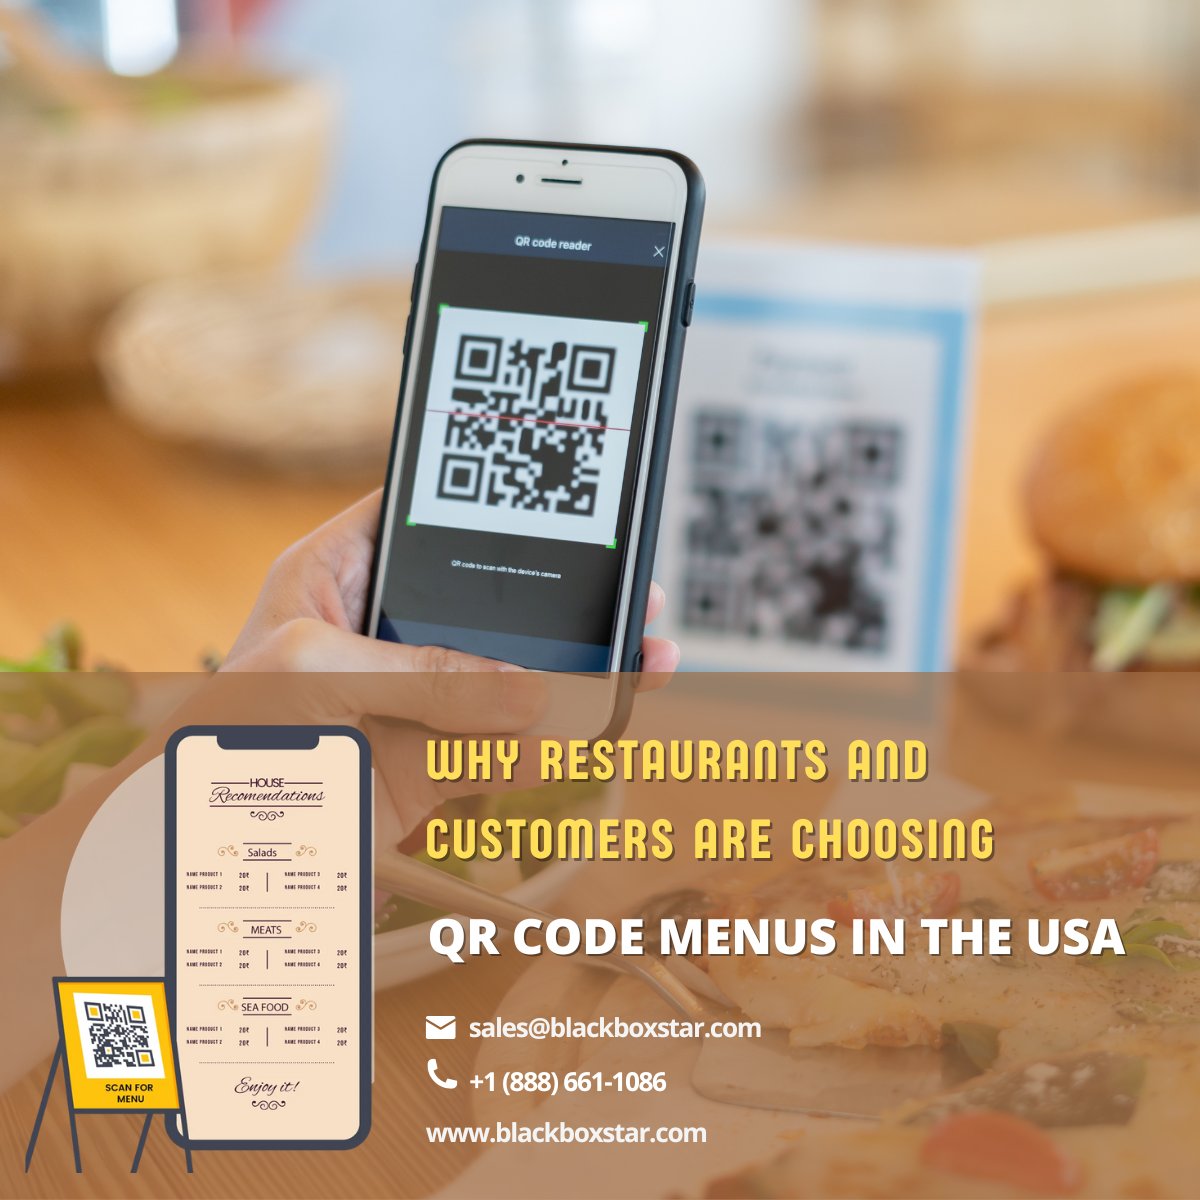 🍽️ Say goodbye to paper menus and hello to QR codes! 📱✨ Discover the future of dining with digital menus – convenient, eco-friendly, and full of surprises! 🌟 #QRmenu #DigitalDining #TechSavvyEats #MenuMagic #QRrevolution